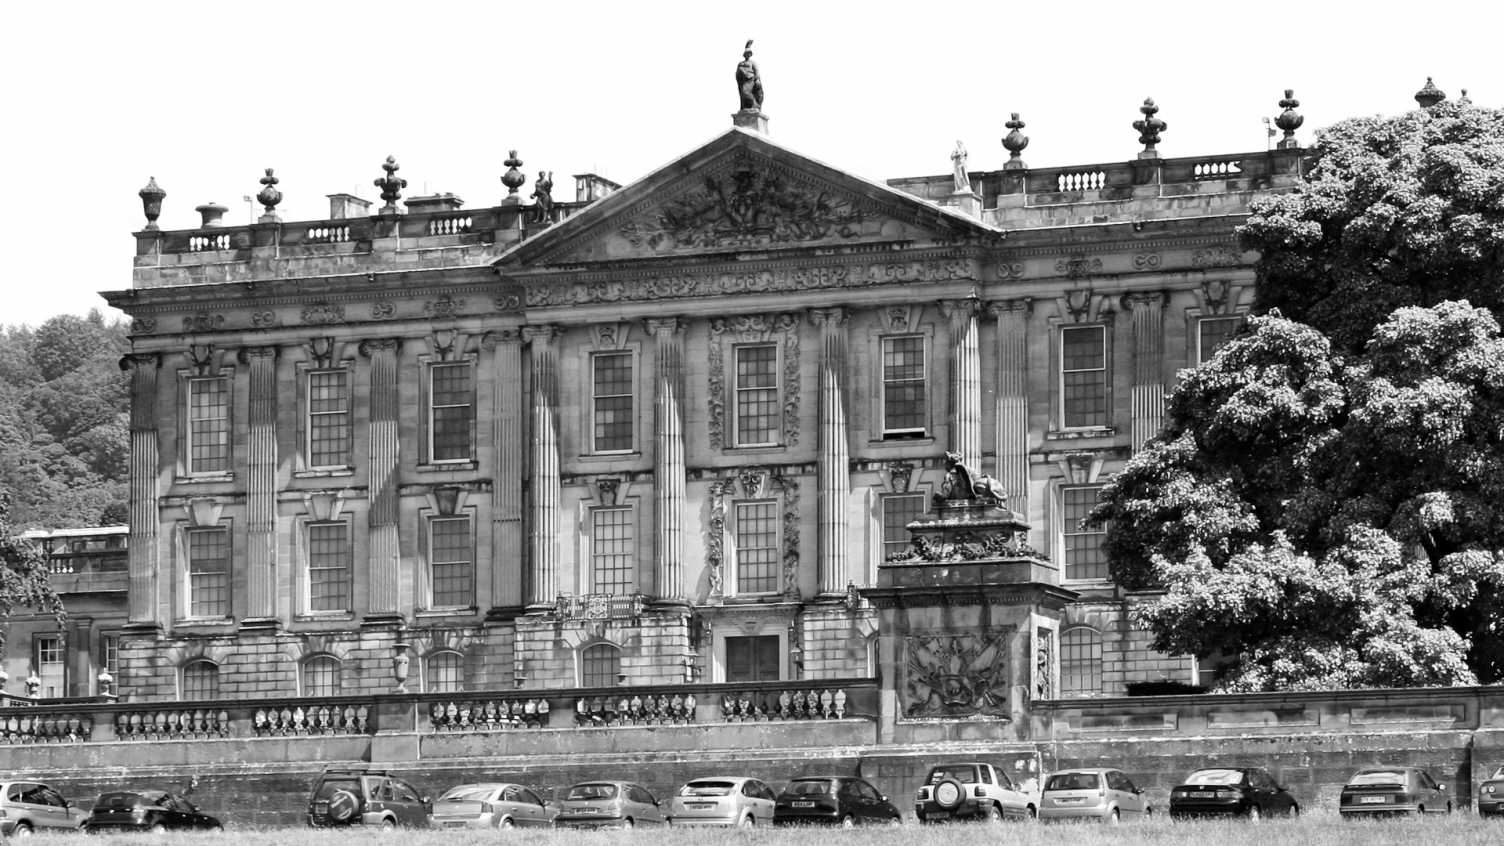 Thumbnail for Chatsworth: frivolous spending, private parties and grumpy governesses | Researc…